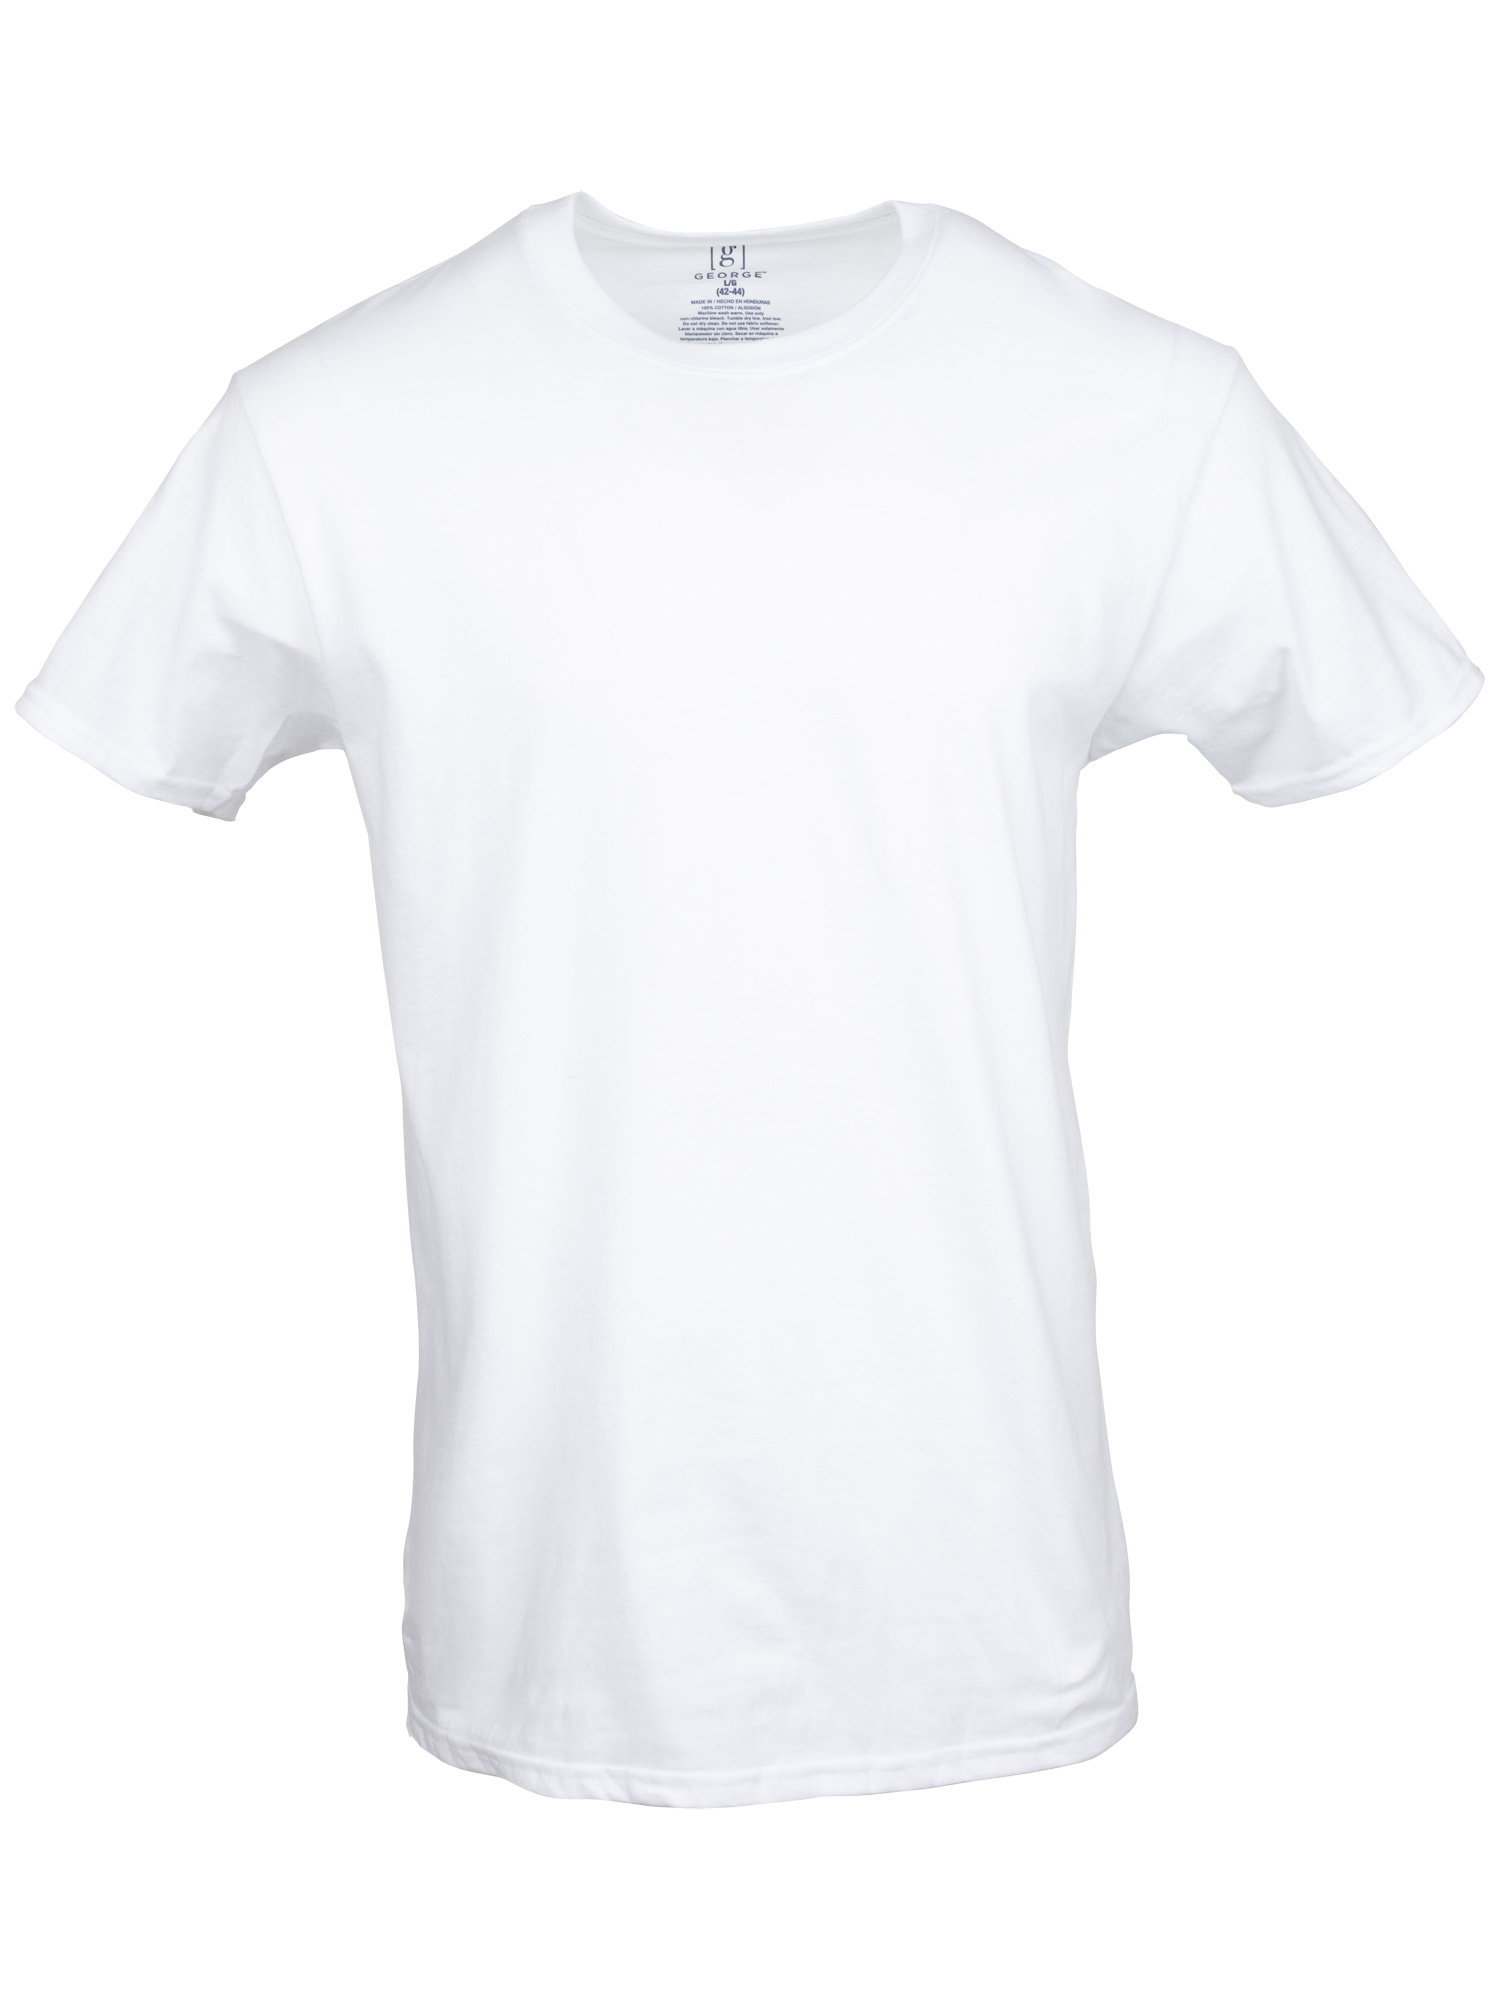 George Men's Crew T-Shirts, 6-Pack - image 3 of 7